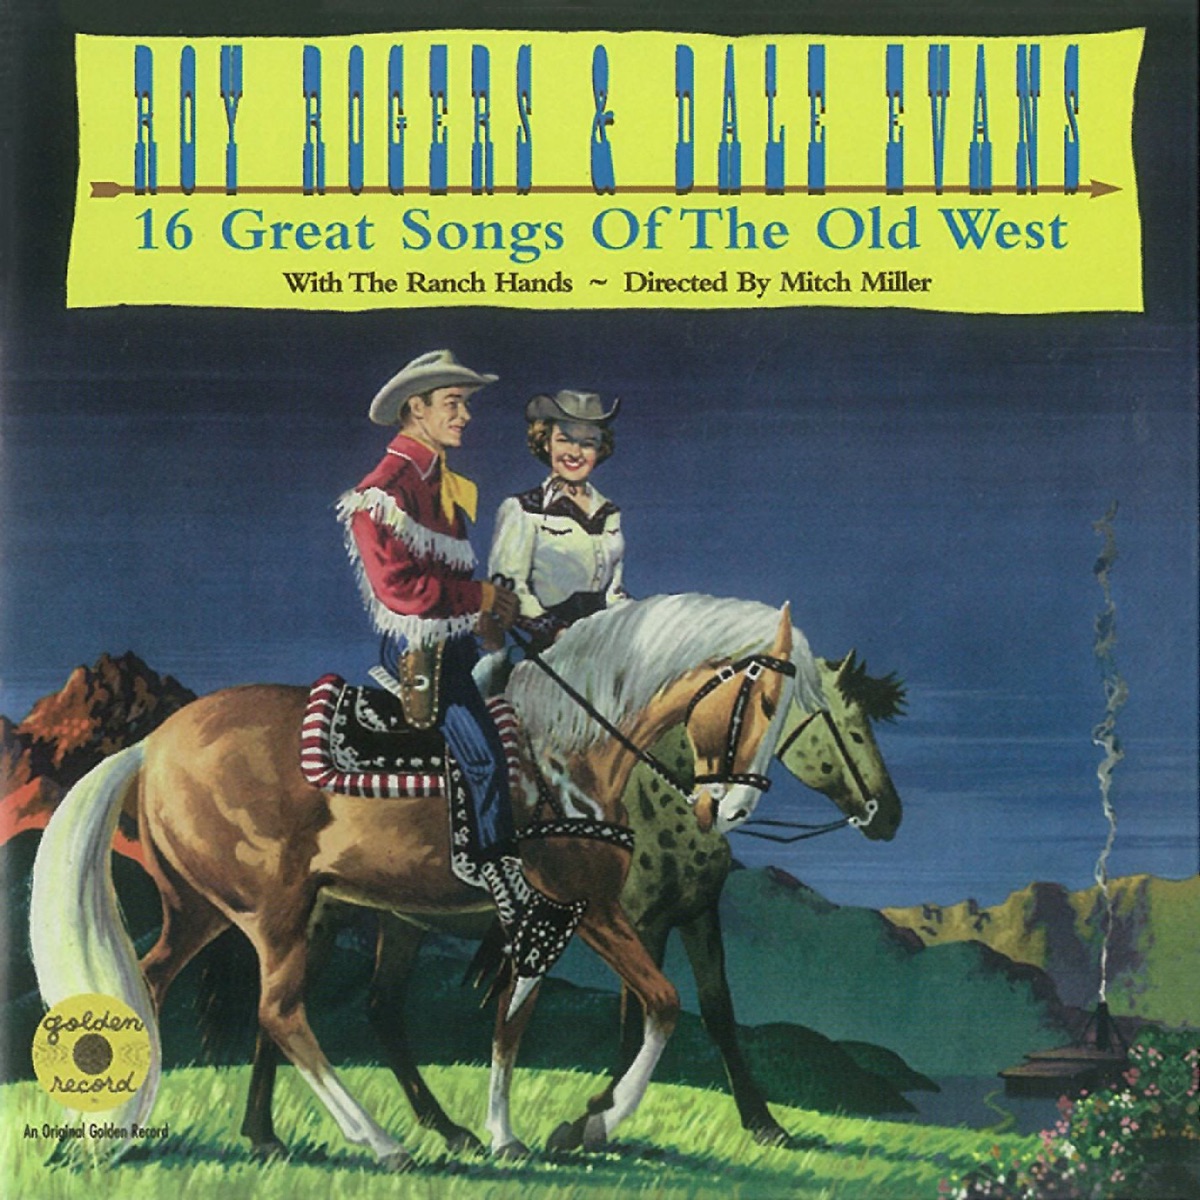 16 Great Songs of the Old West by Roy Rogers & Dale Evans on Apple Music